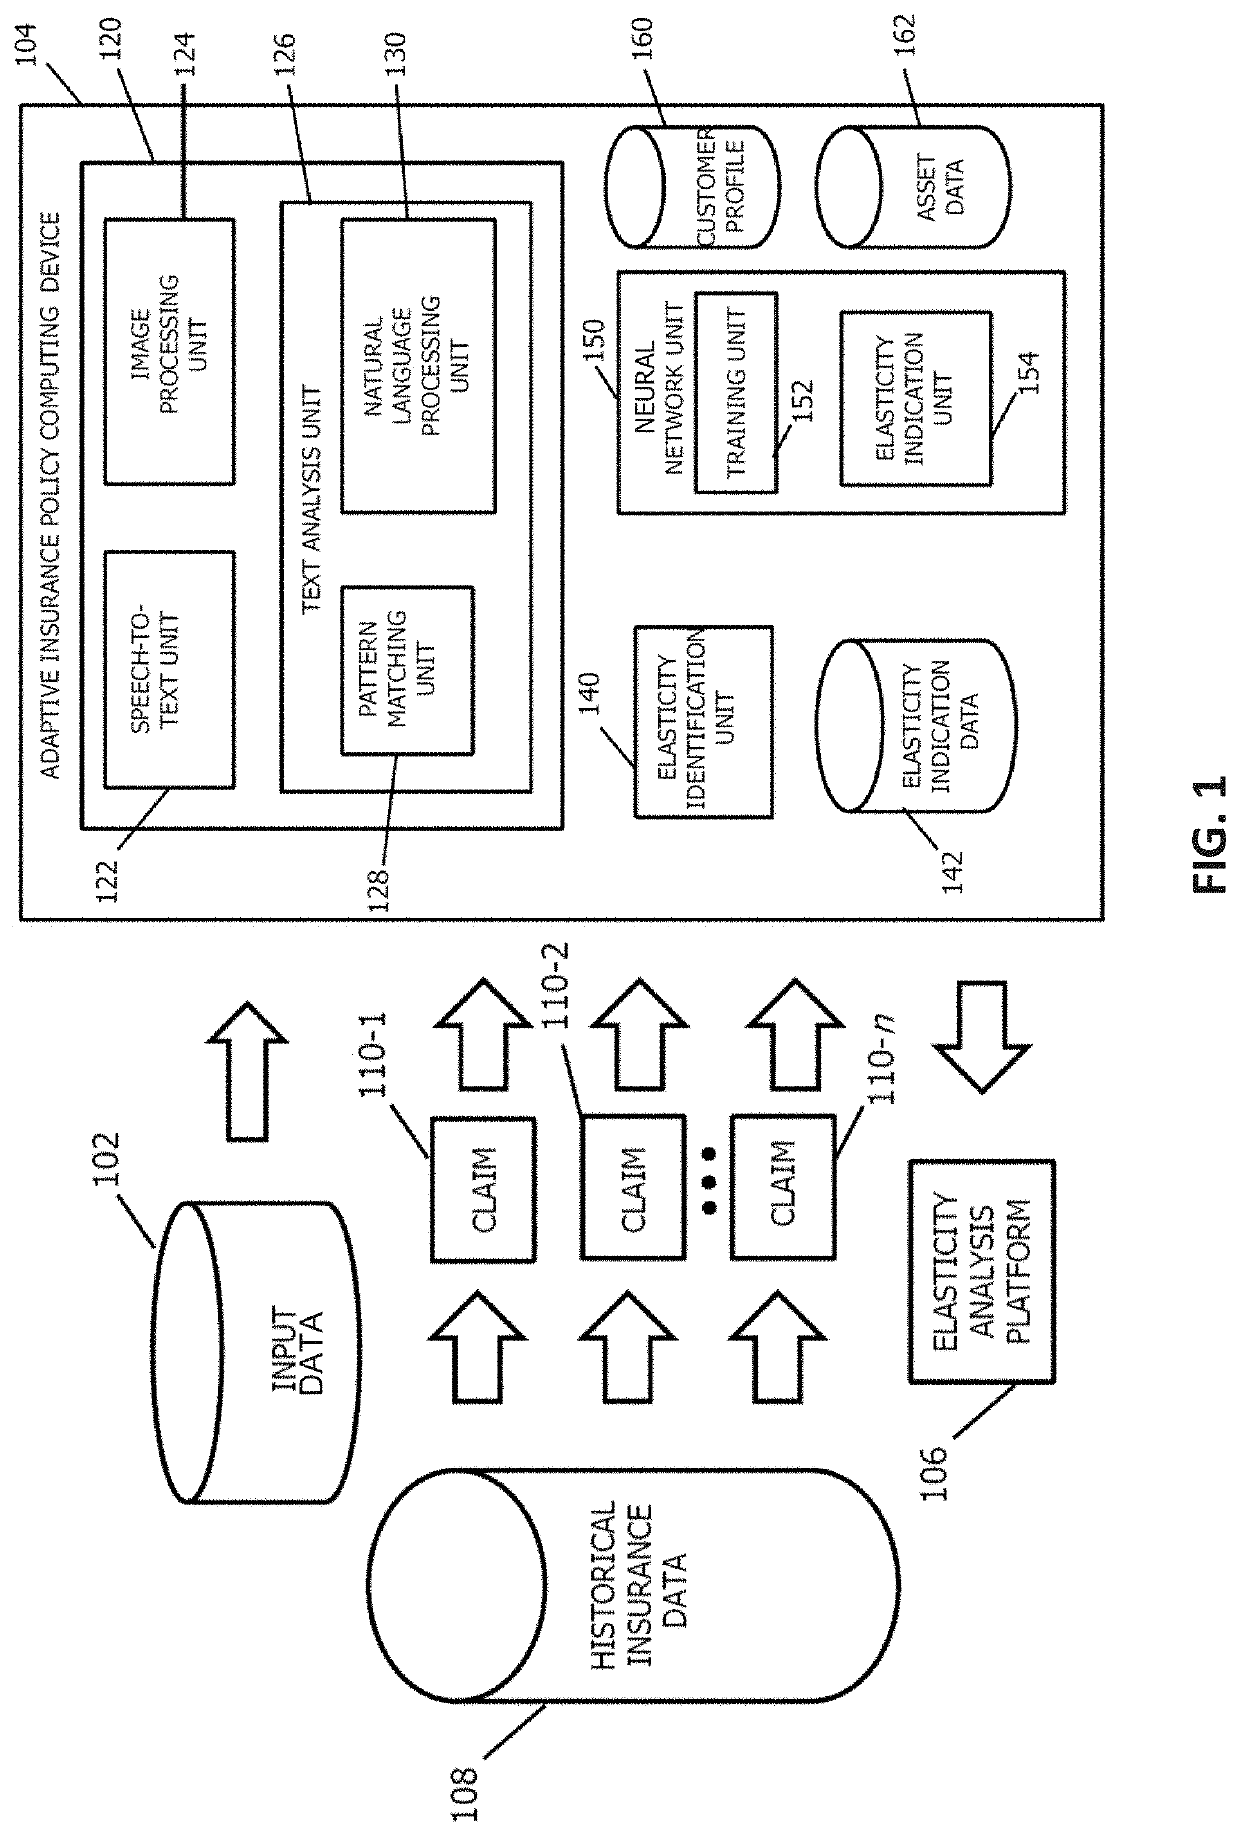 Machine learning systems and methods for elasticity analysis